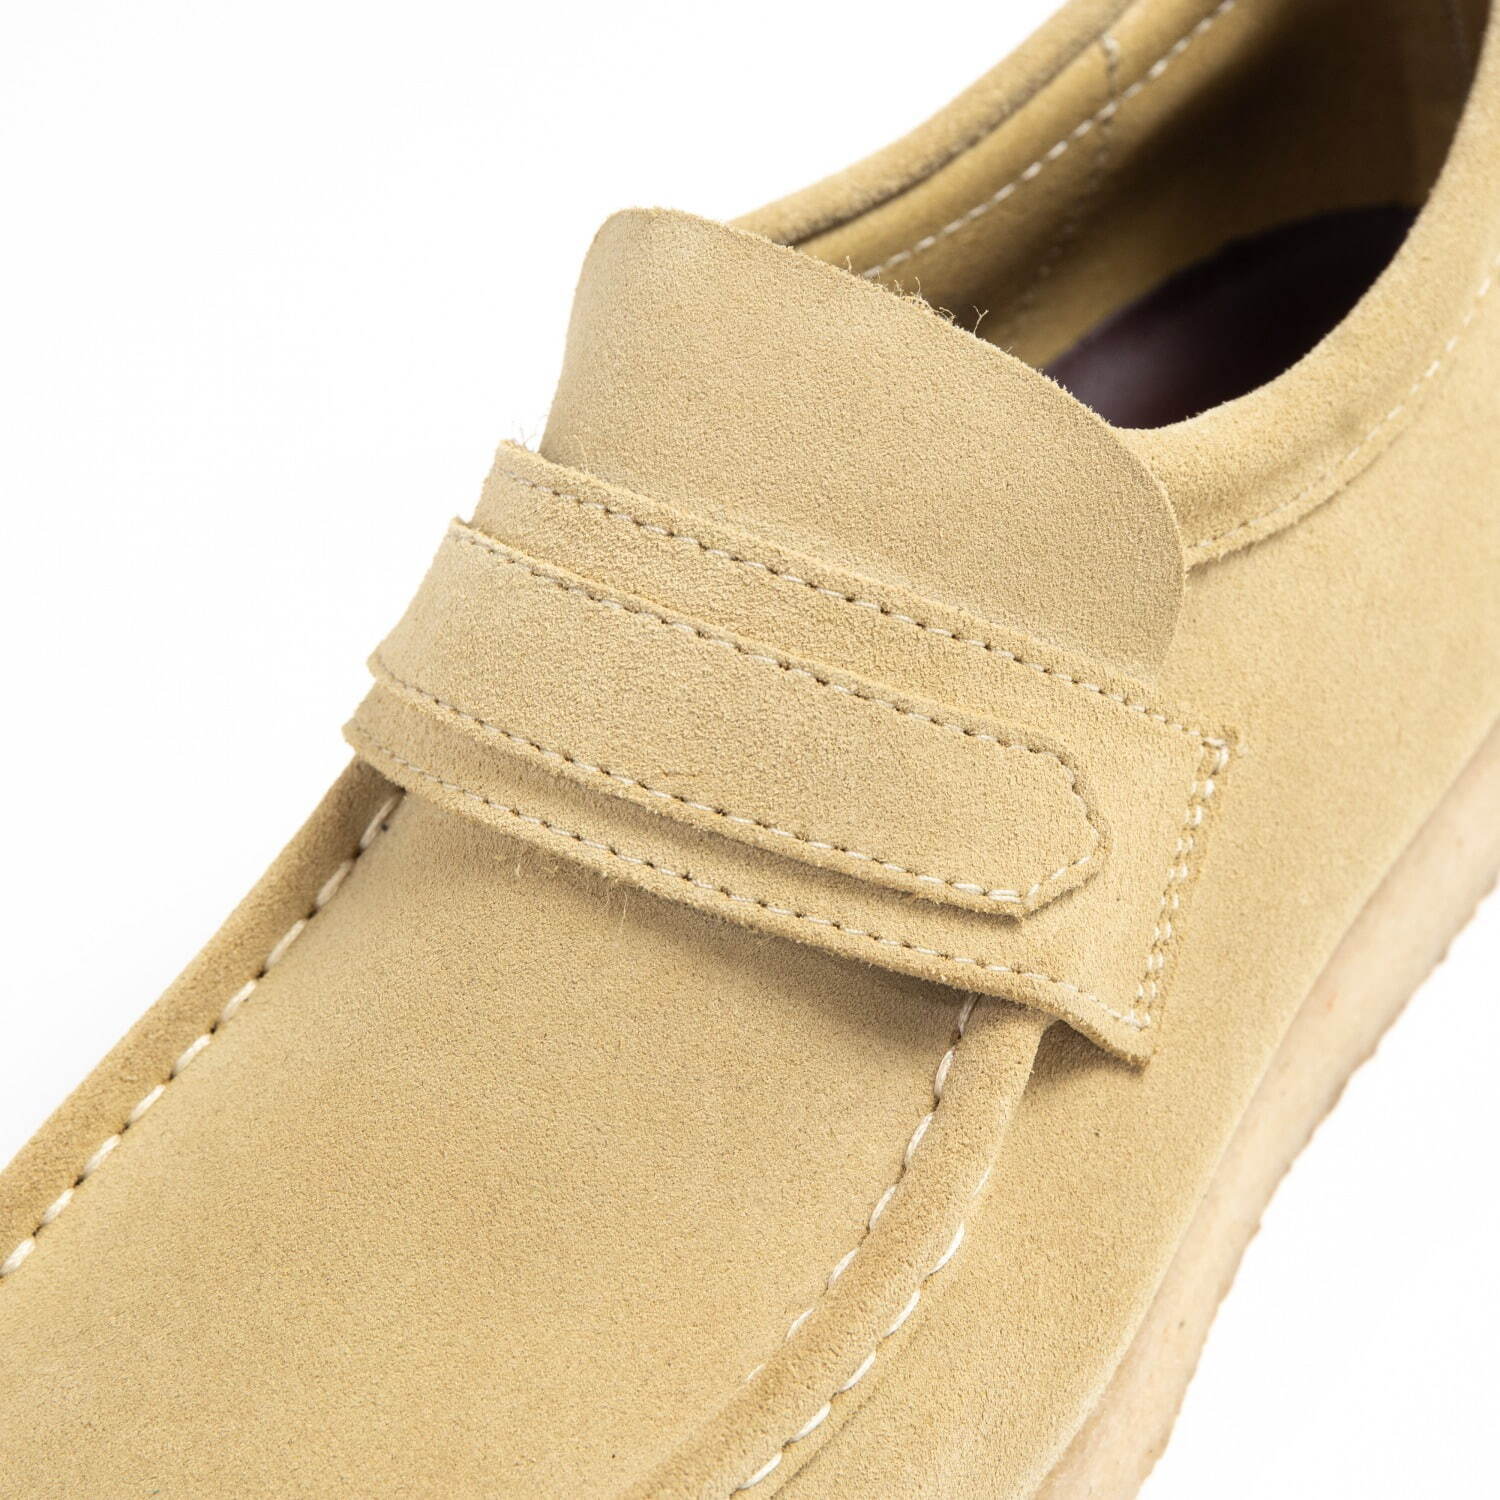 Clarks Made a Laceless Wallabee Loafer, Finally